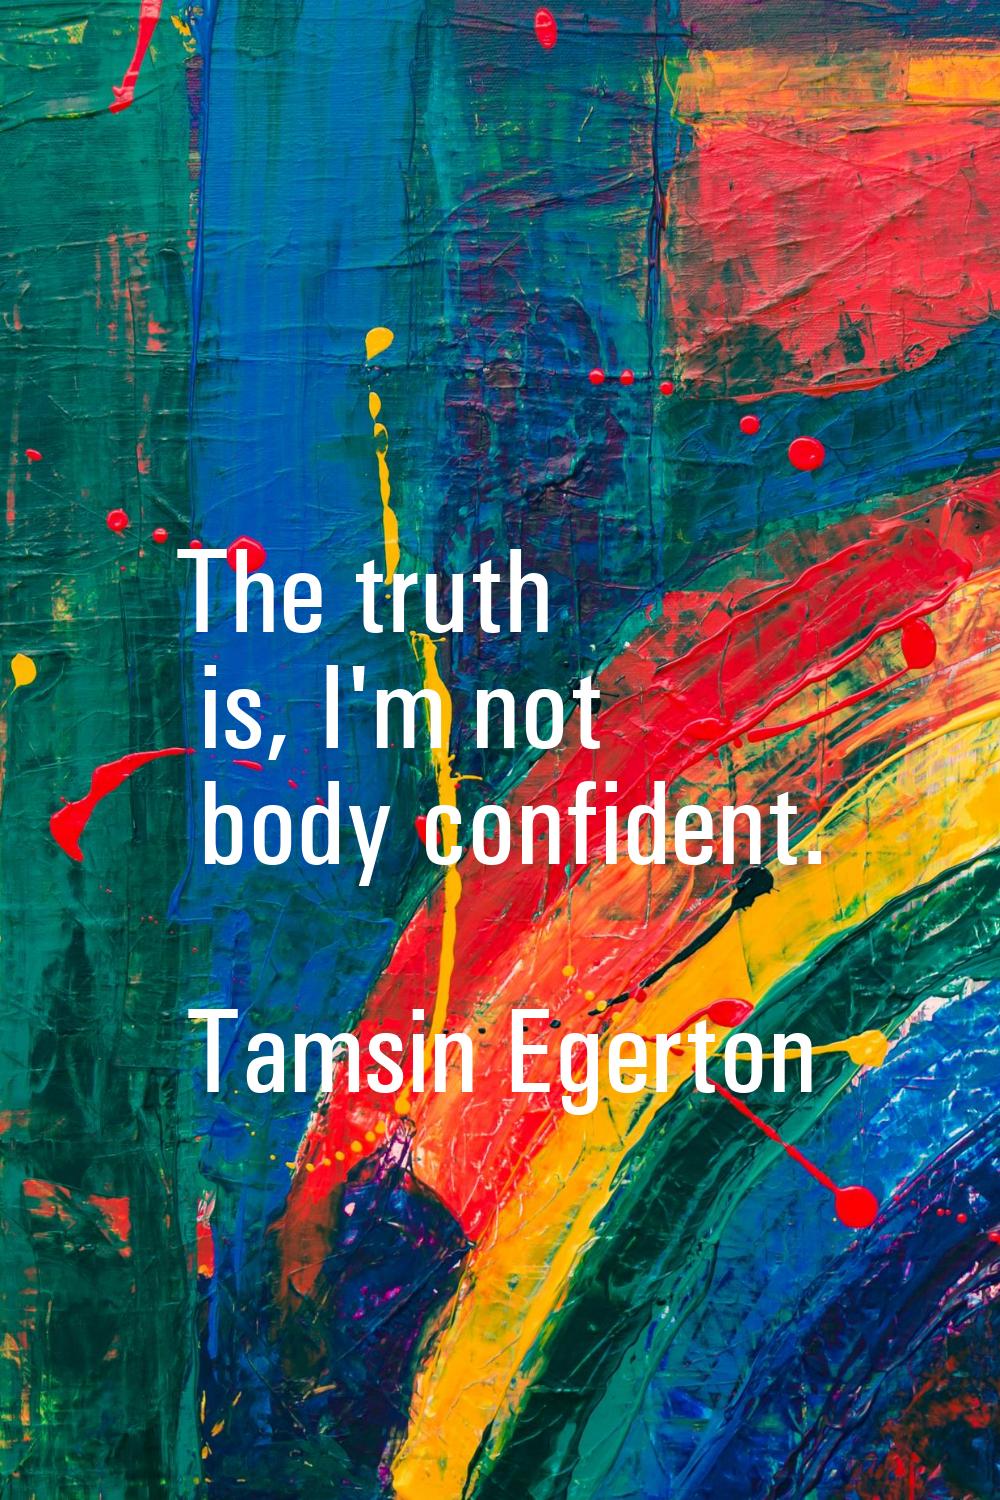 The truth is, I'm not body confident.